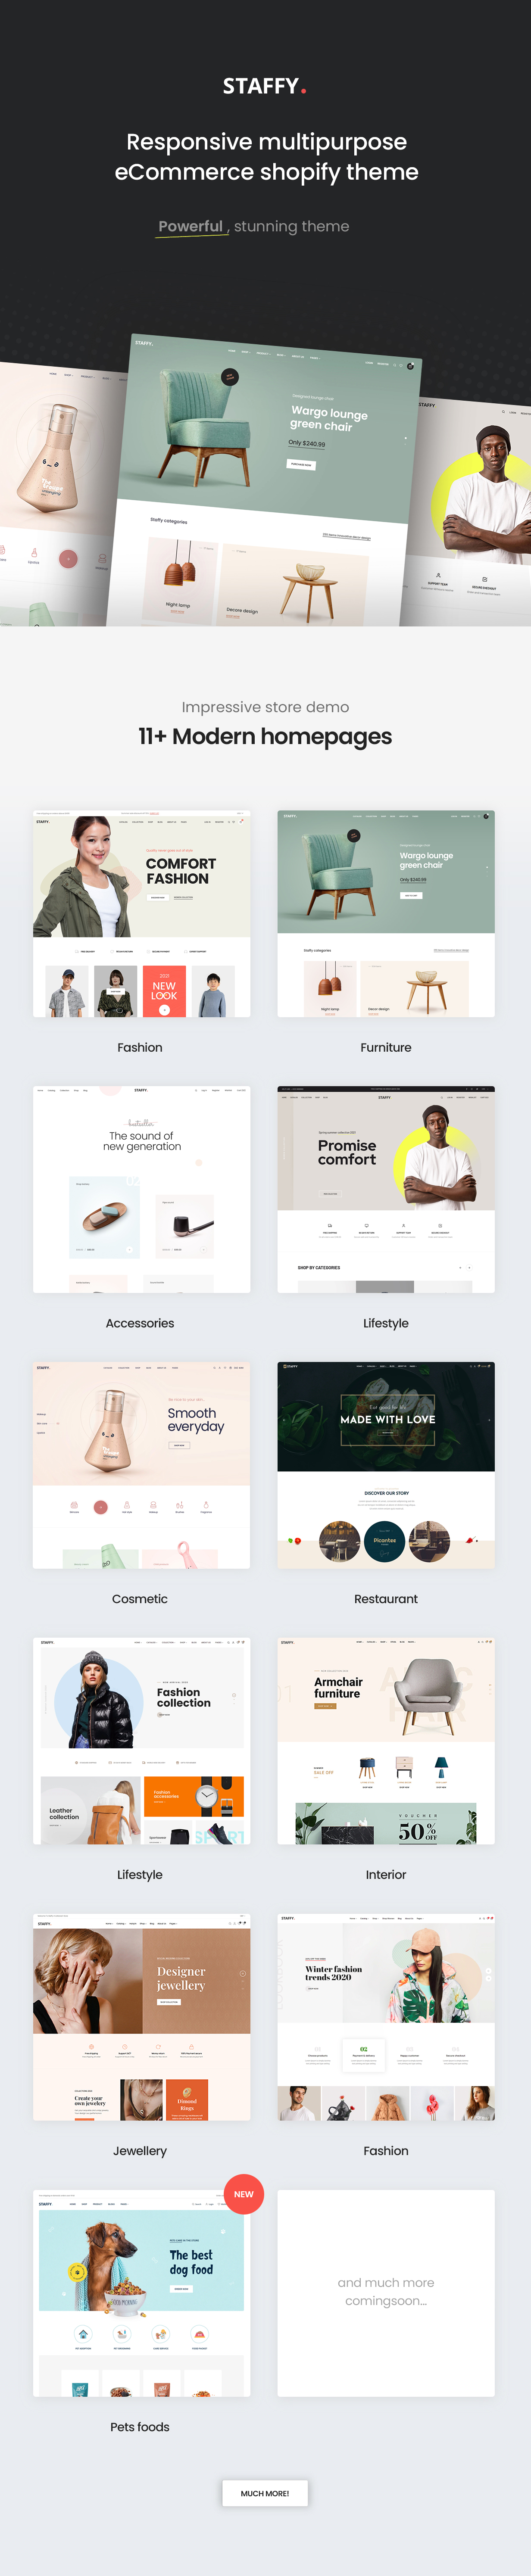 Staffy - The Responsive Multipurpose Shopify eCommerce Theme - 1